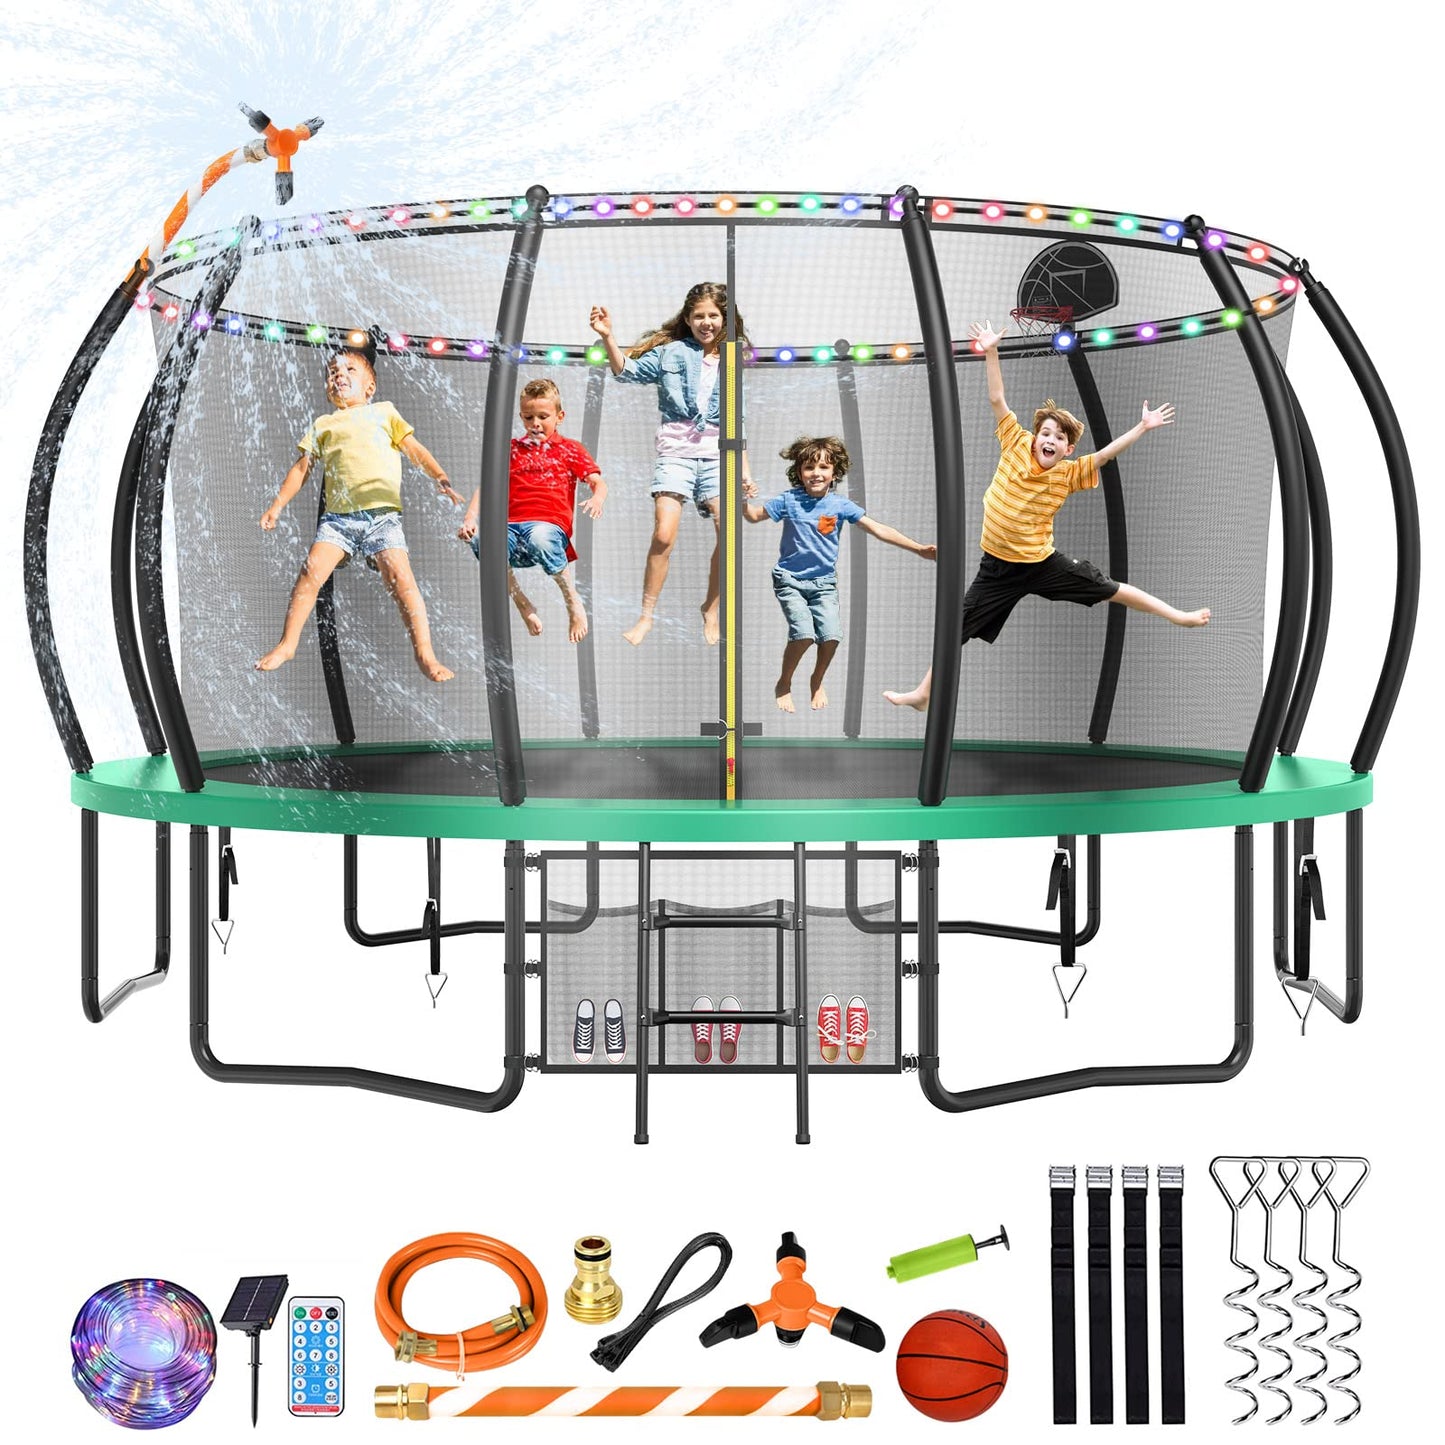 Lyromix 16FT Trampoline for Kids and Adults, Outdoor Trampolines with Curved Poles, Pumpkin Shaped Backyard Trampoline with Sprinkler, Stakes, Light, Basketball, Basketball Hoop and Storage Bag